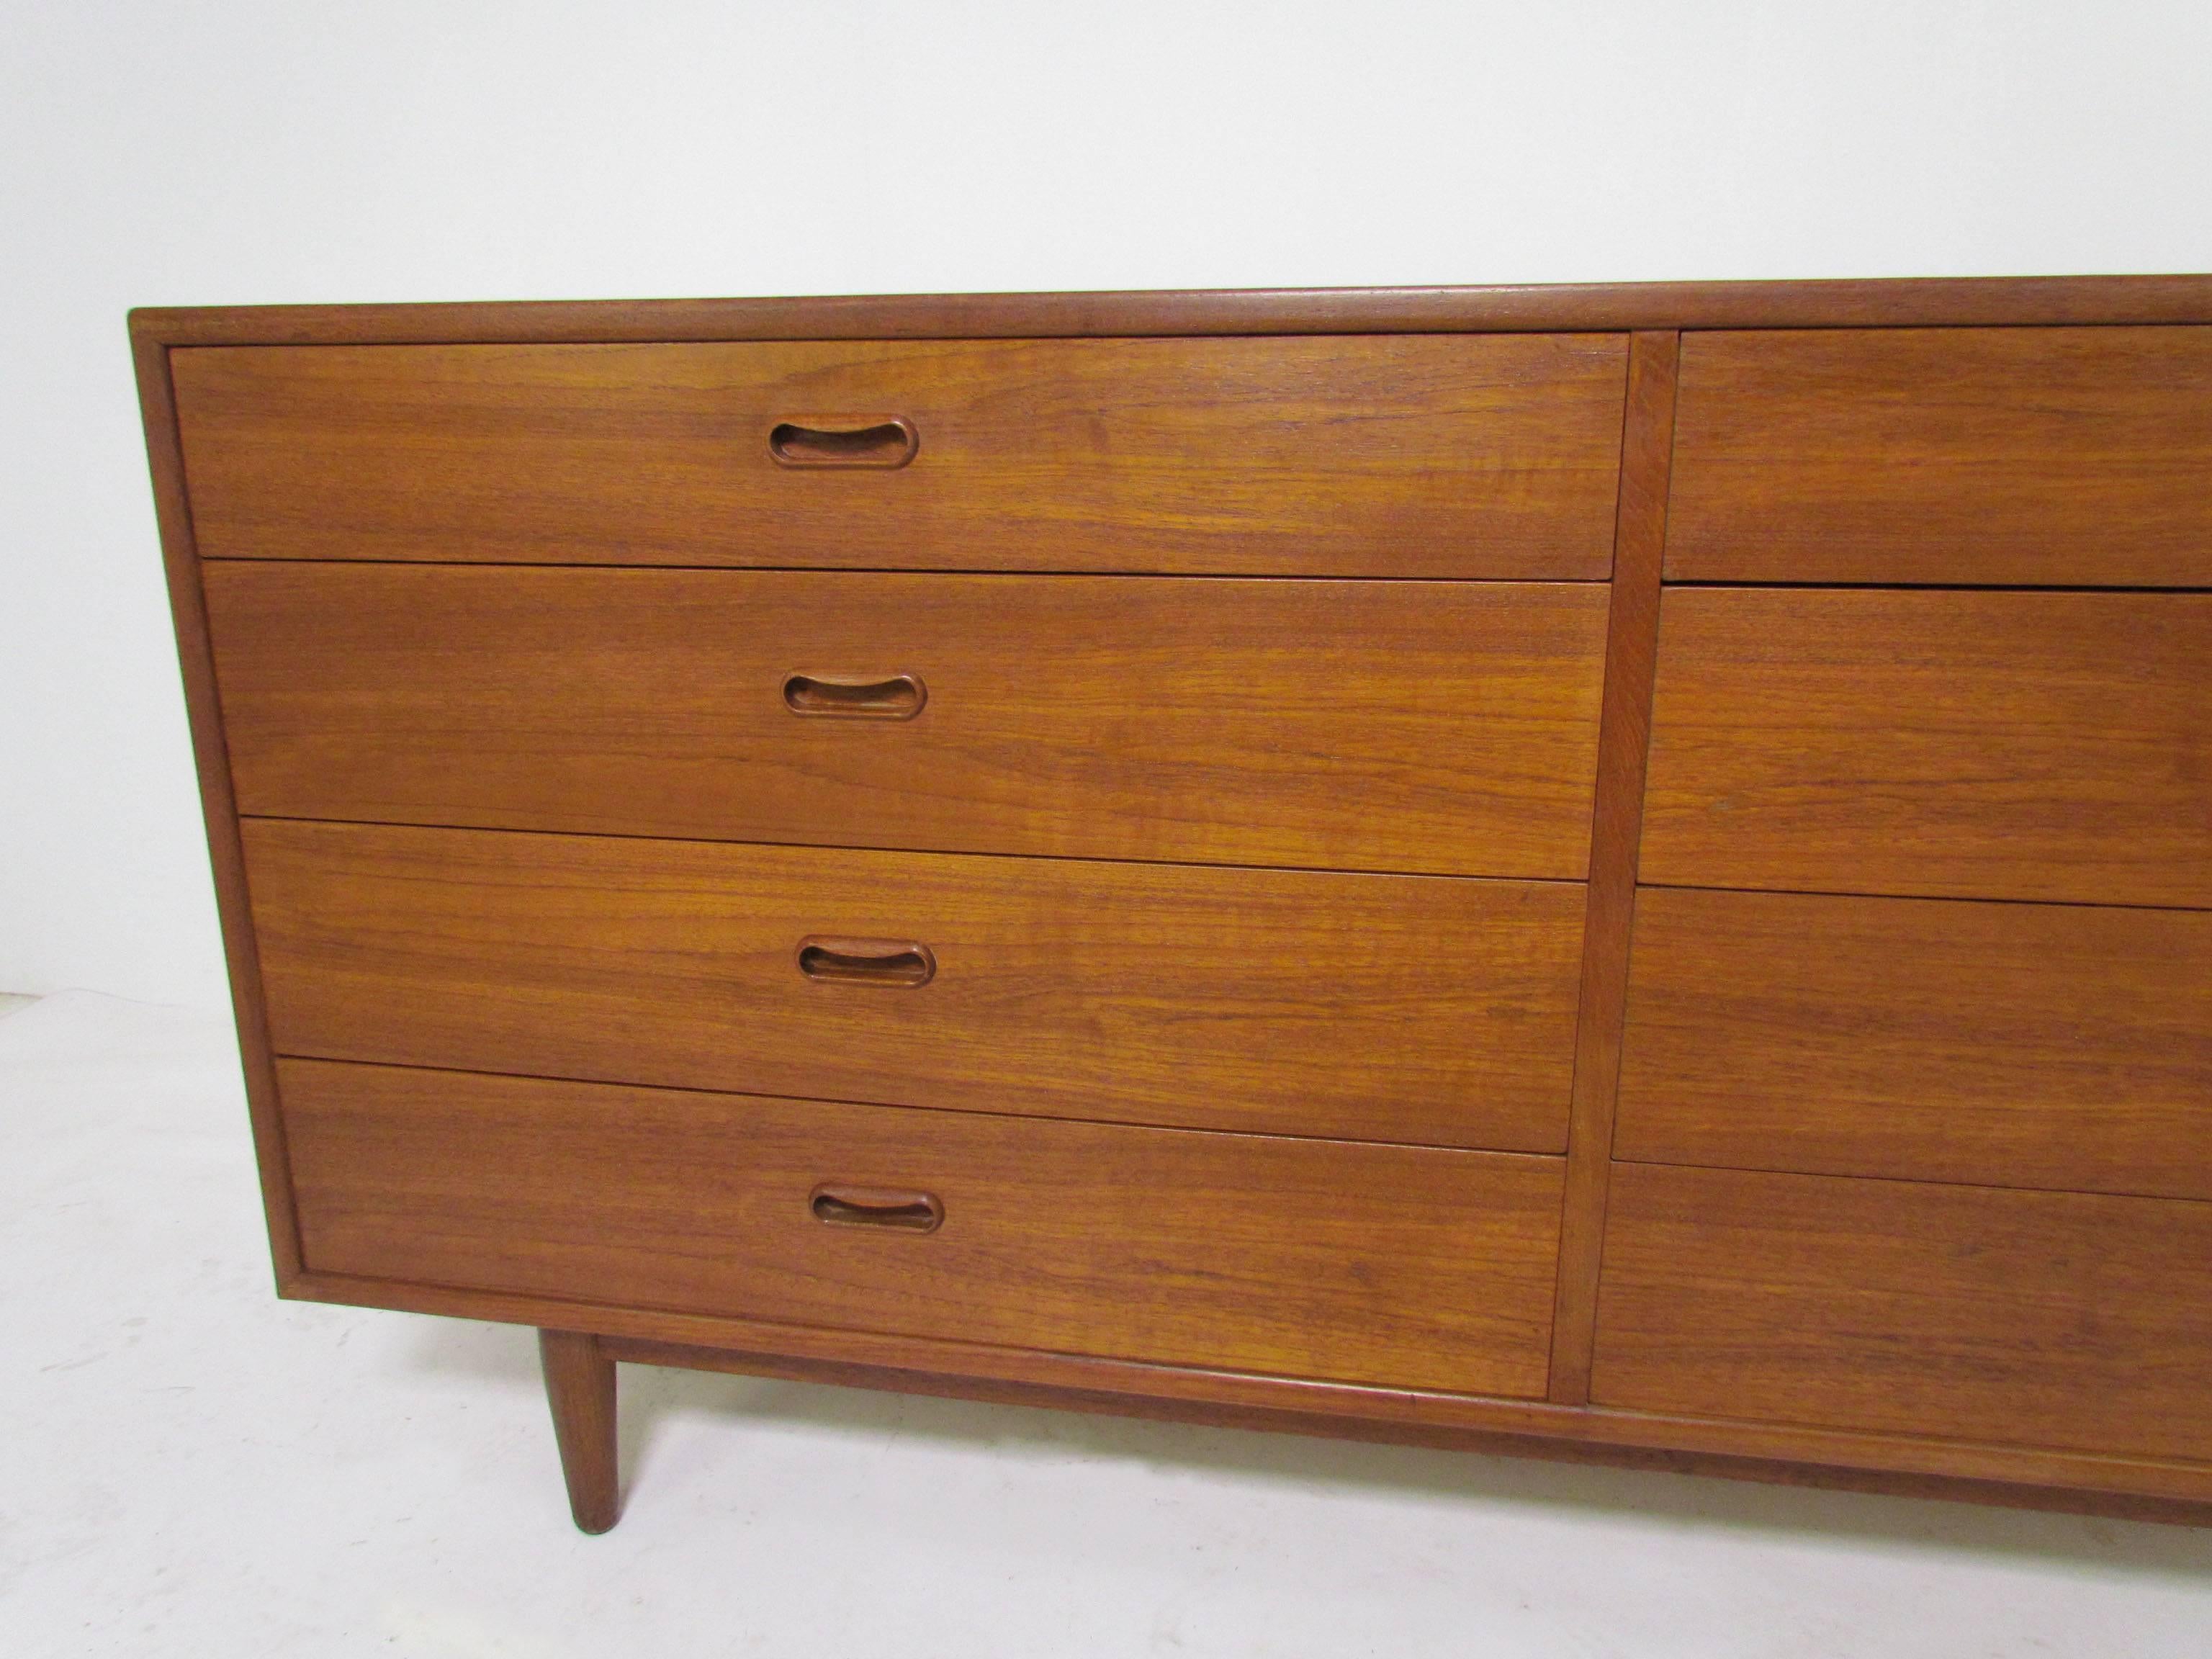 Danish teak eight-drawer dresser featuring a sleek low profile, bookmatched grain, and carved inset pulls, circa 1960s. This has a finished back so can float in a room if desired. Retailed at Spivack Furniture, New York.